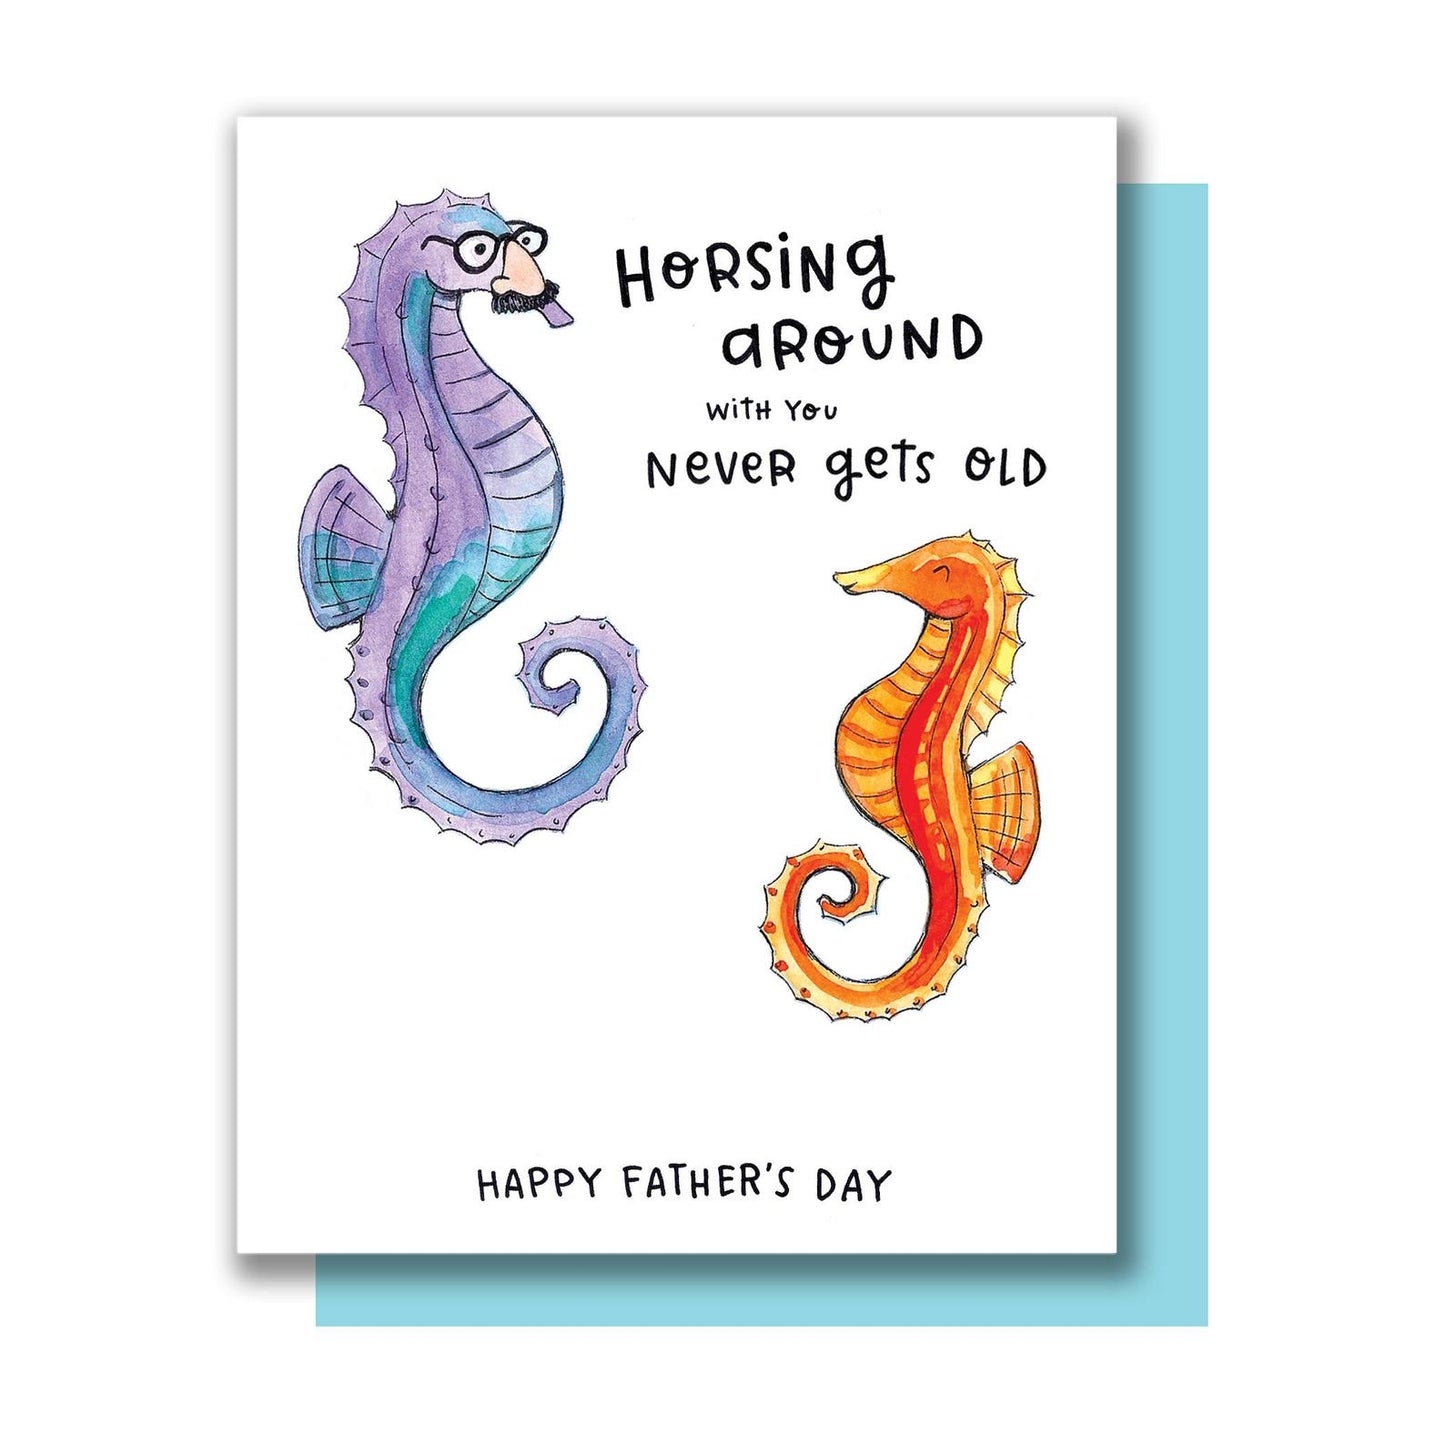 By Paper Wilderness. Did you know male seahorses are the ones who give birth? Now that's an awesome dad! Let yours know you appreciate him and his antics with this silly seahorse pair! Seahorse Dad Card details: Original watercolor illustration printed on 110 lb. premium bright white paper. 4.25 x 5.5" card. Blank inside for your message. Comes with a teal paper envelope in a protective cellophane sleeve!